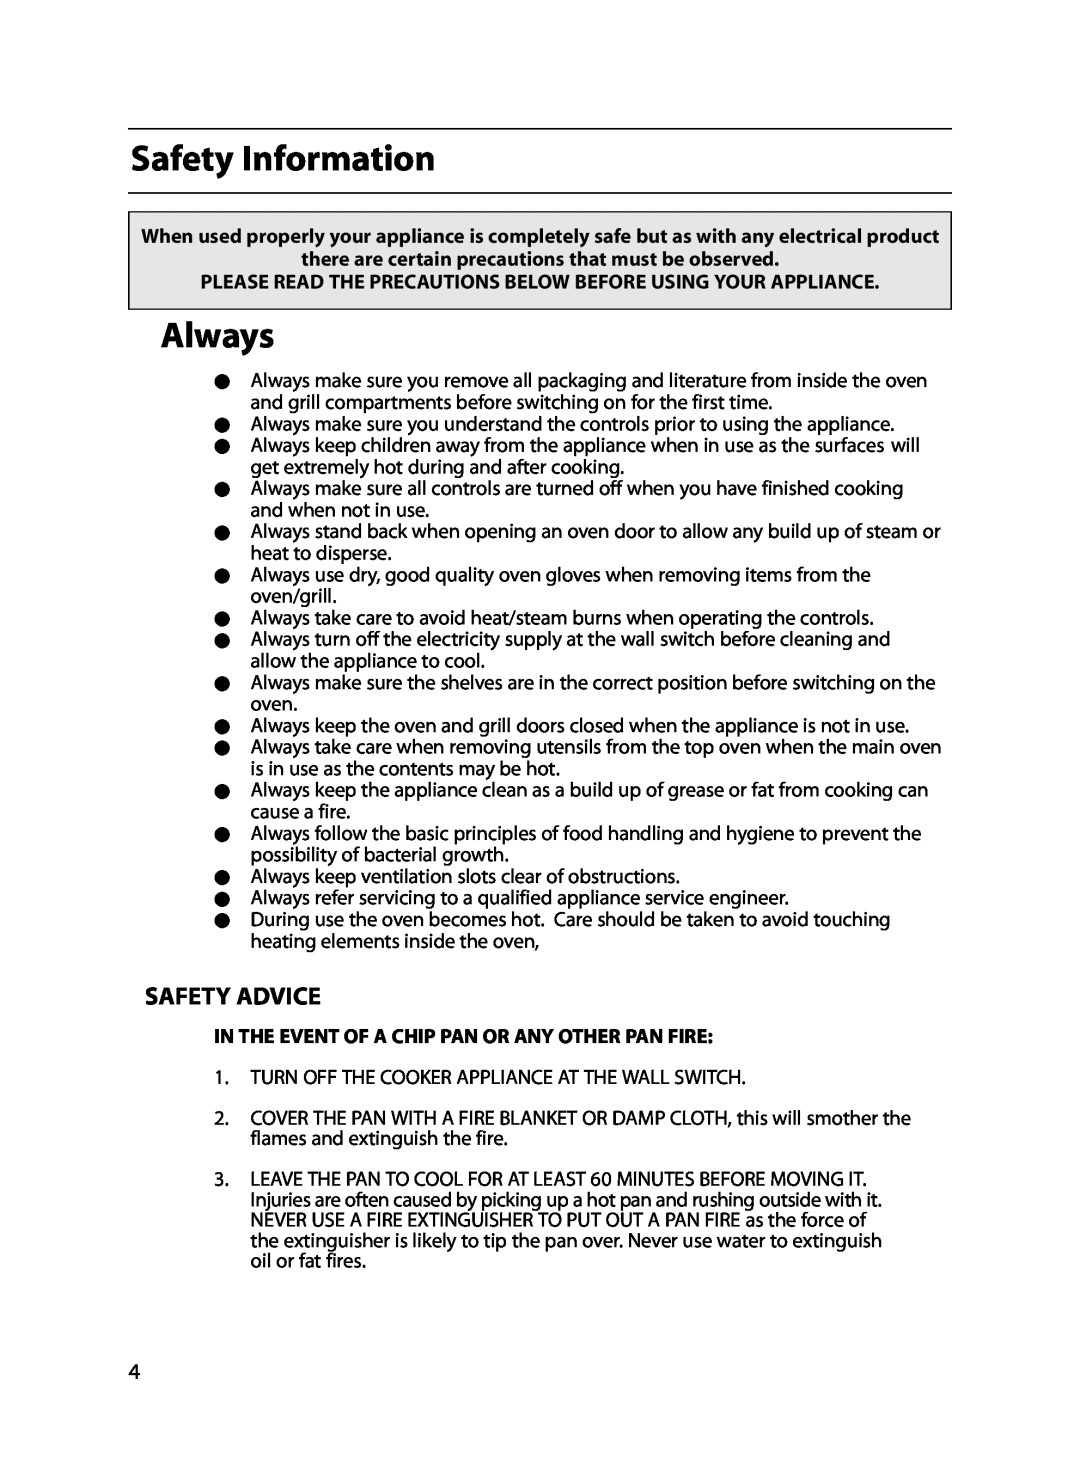 Indesit FIU20 MK2 manual Safety Information, Always, Safety Advice, there are certain precautions that must be observed 